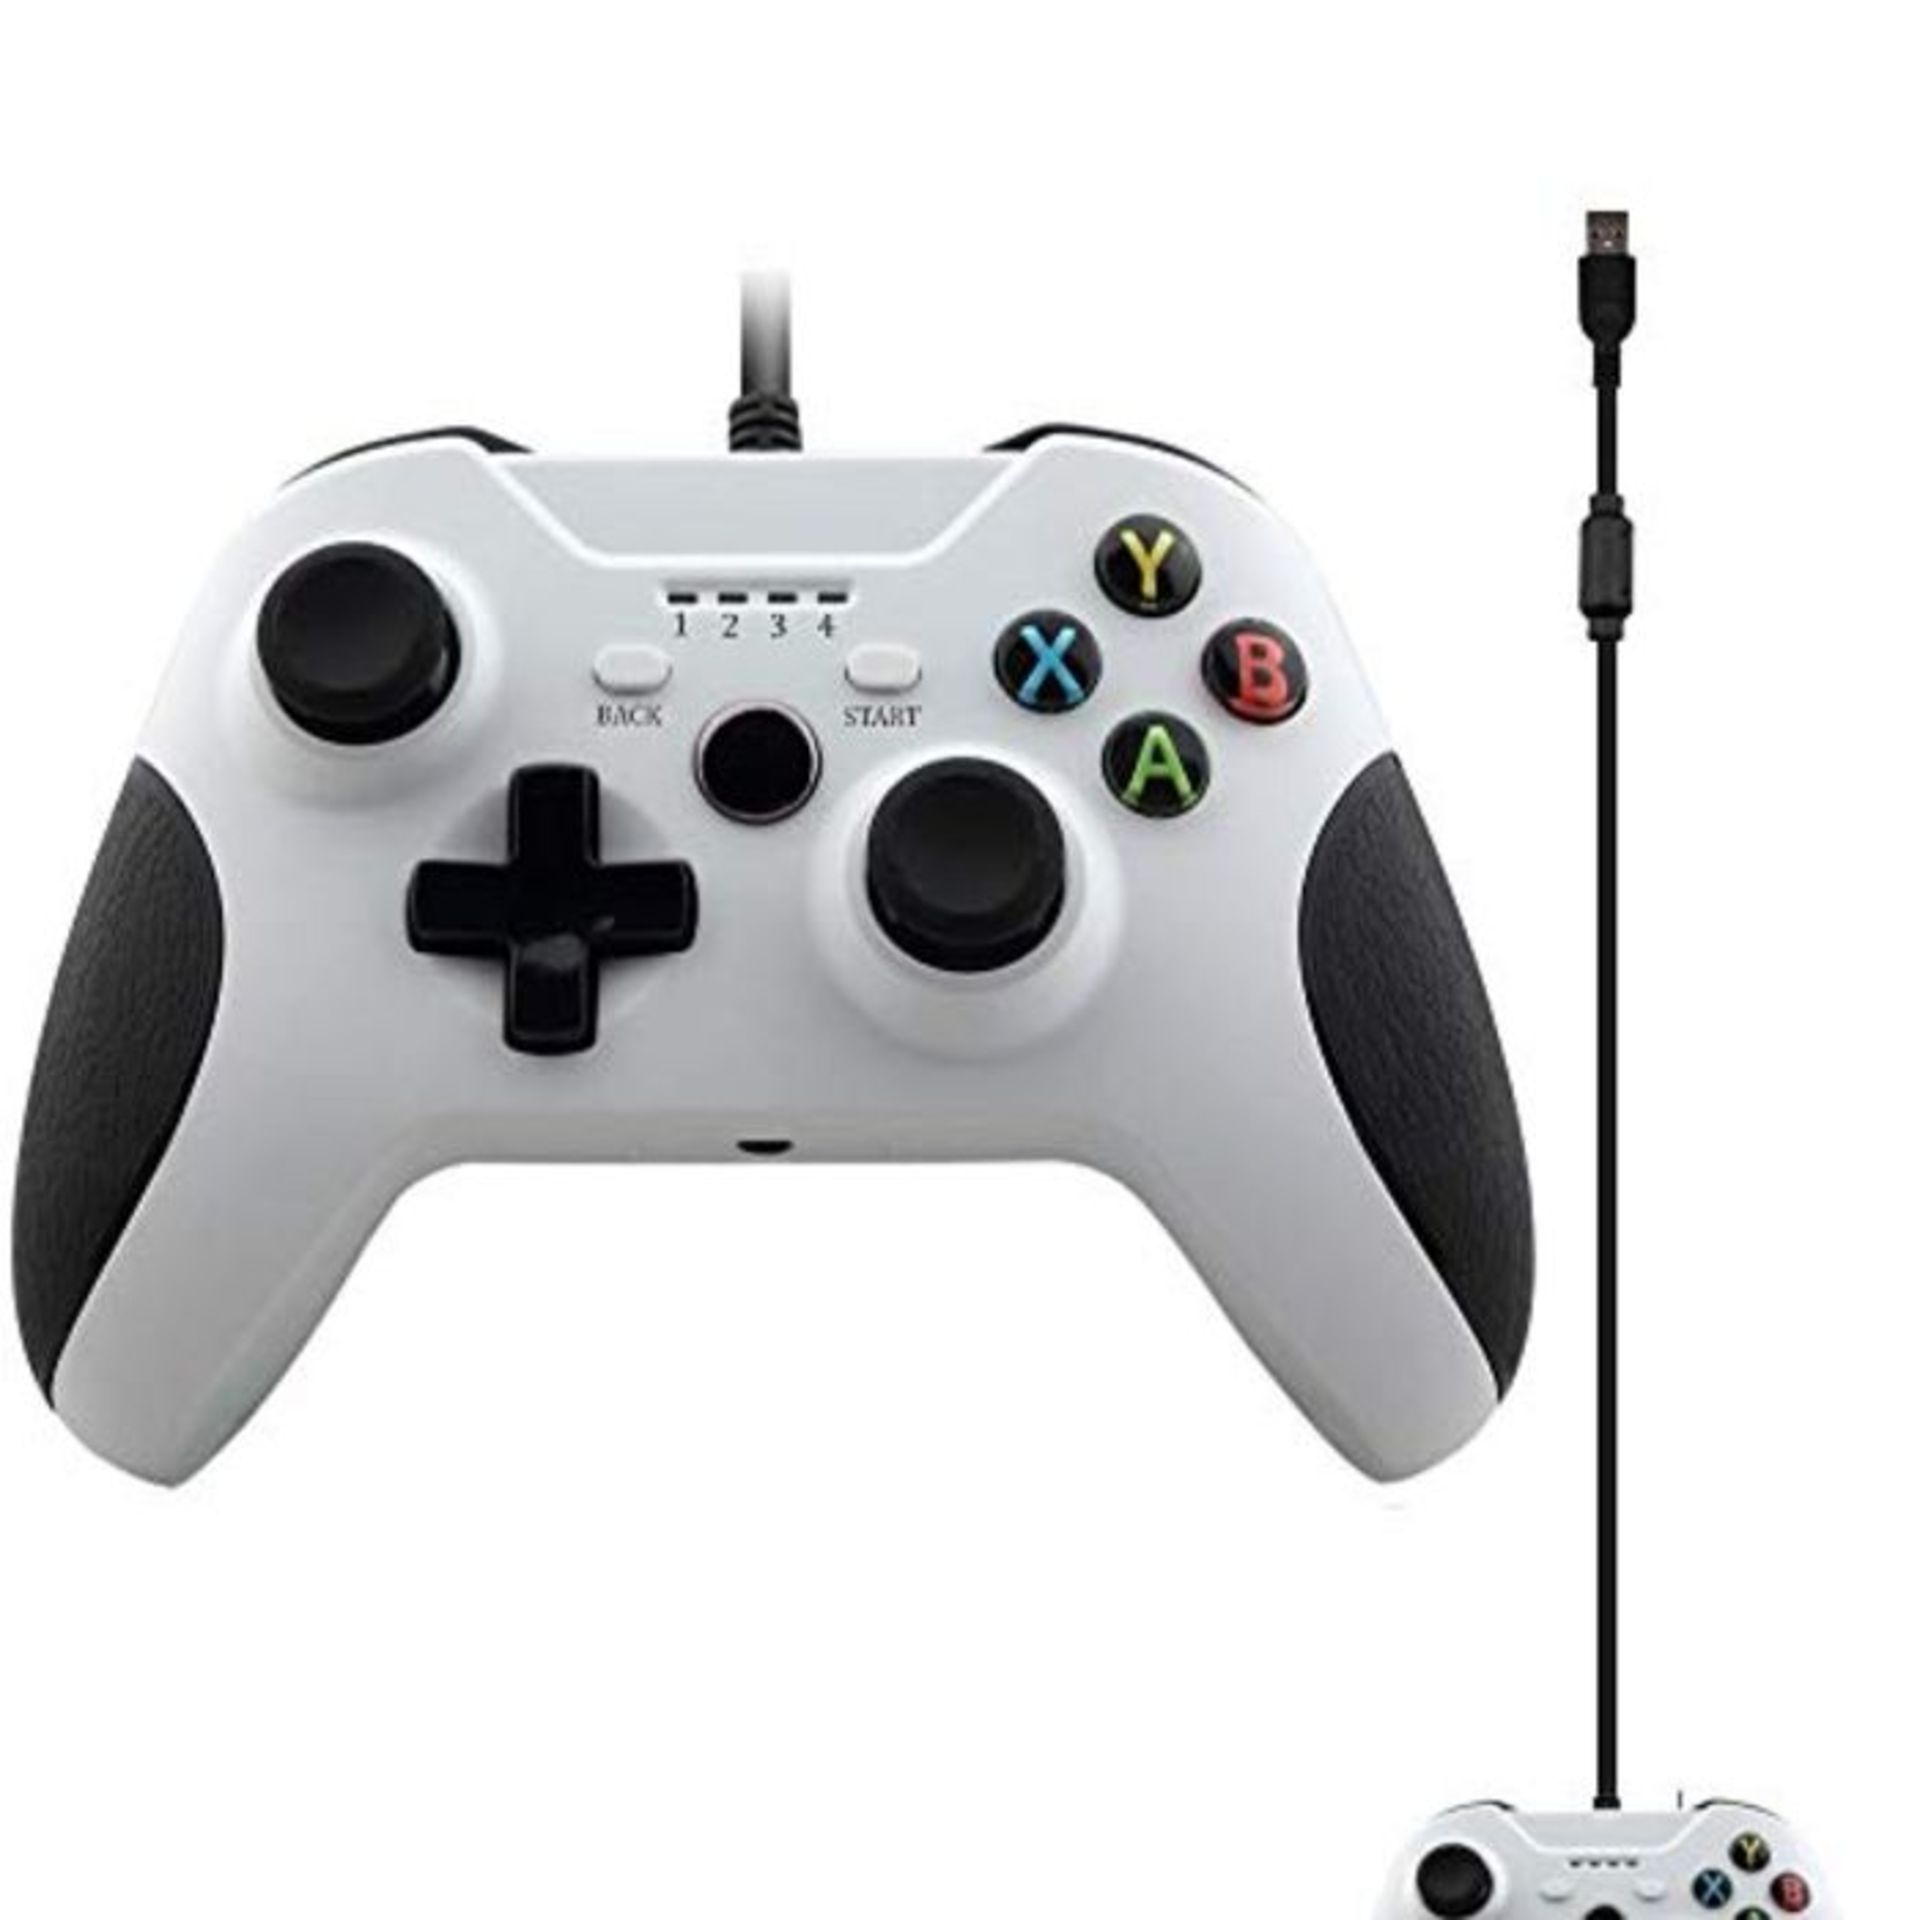 obqo Wired Controller for Xbox One,USB Controllers Gamepad Joypad with Dual Vibration